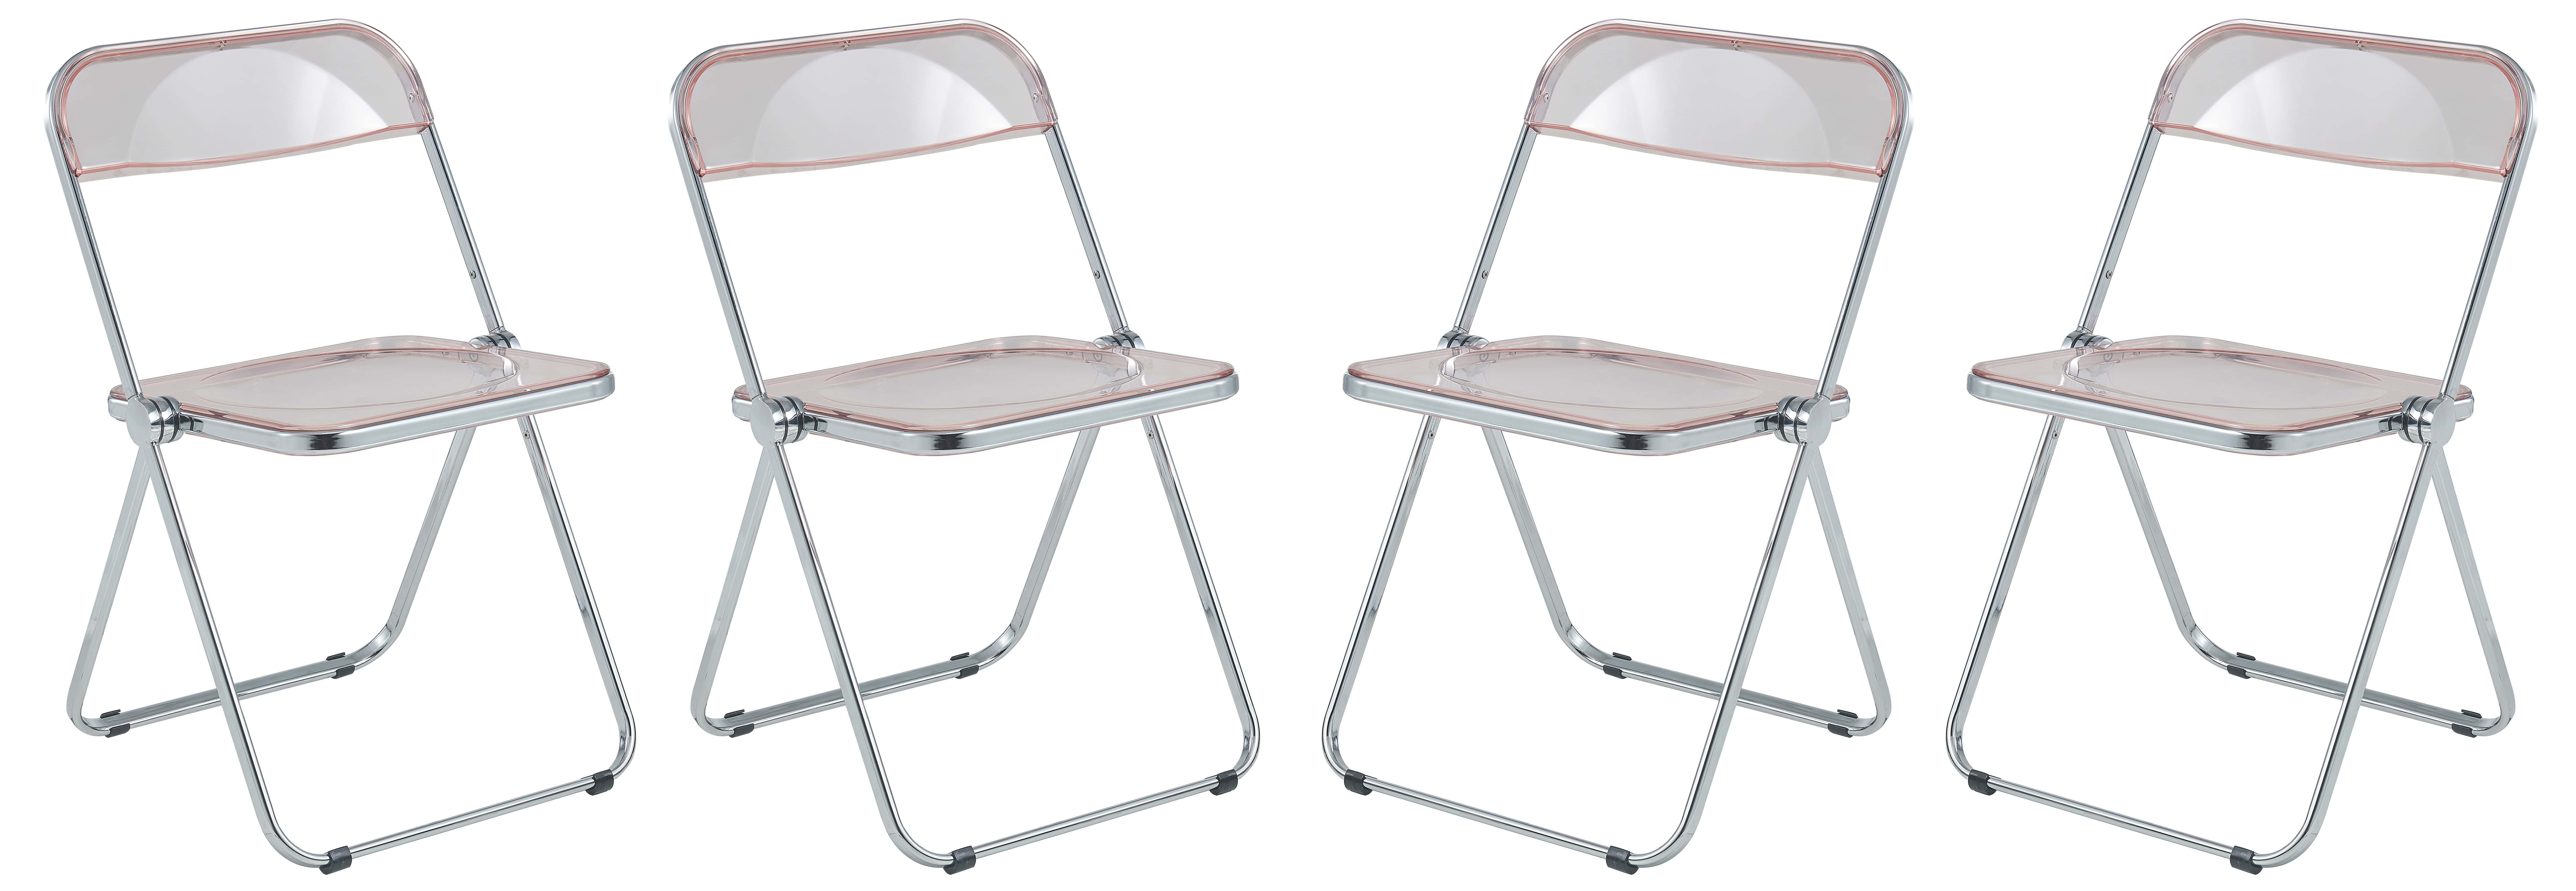 Lawrence Rose Pink Acrylic Folding Chair w/Metal Frame (Set of 4) by  LeisureMod